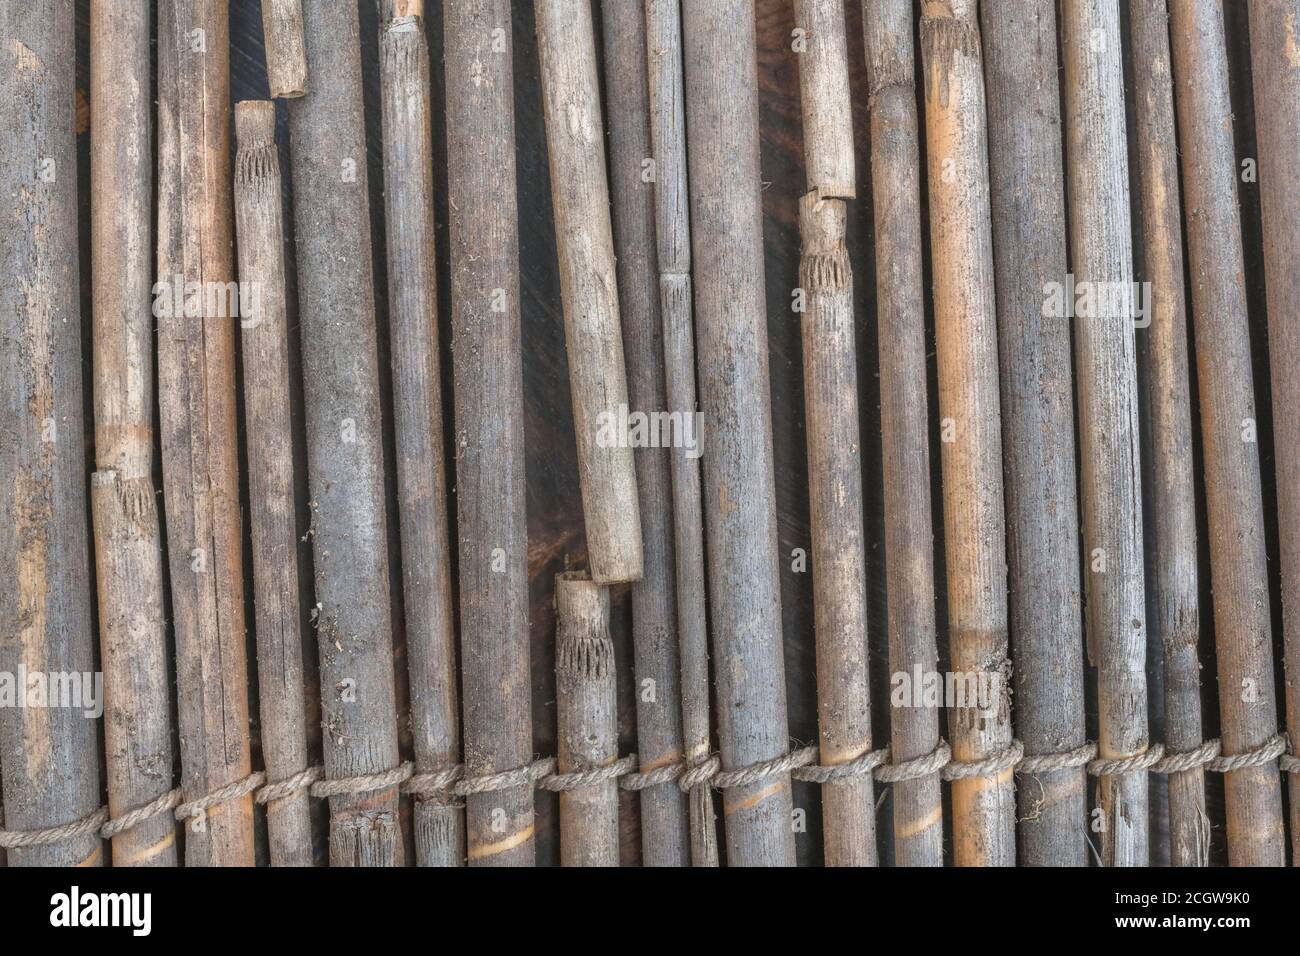 Close shot of flat section of natural reed garden screening, showing traces of reed decay. Nice natural texture background or metaphor for gardening. Stock Photo